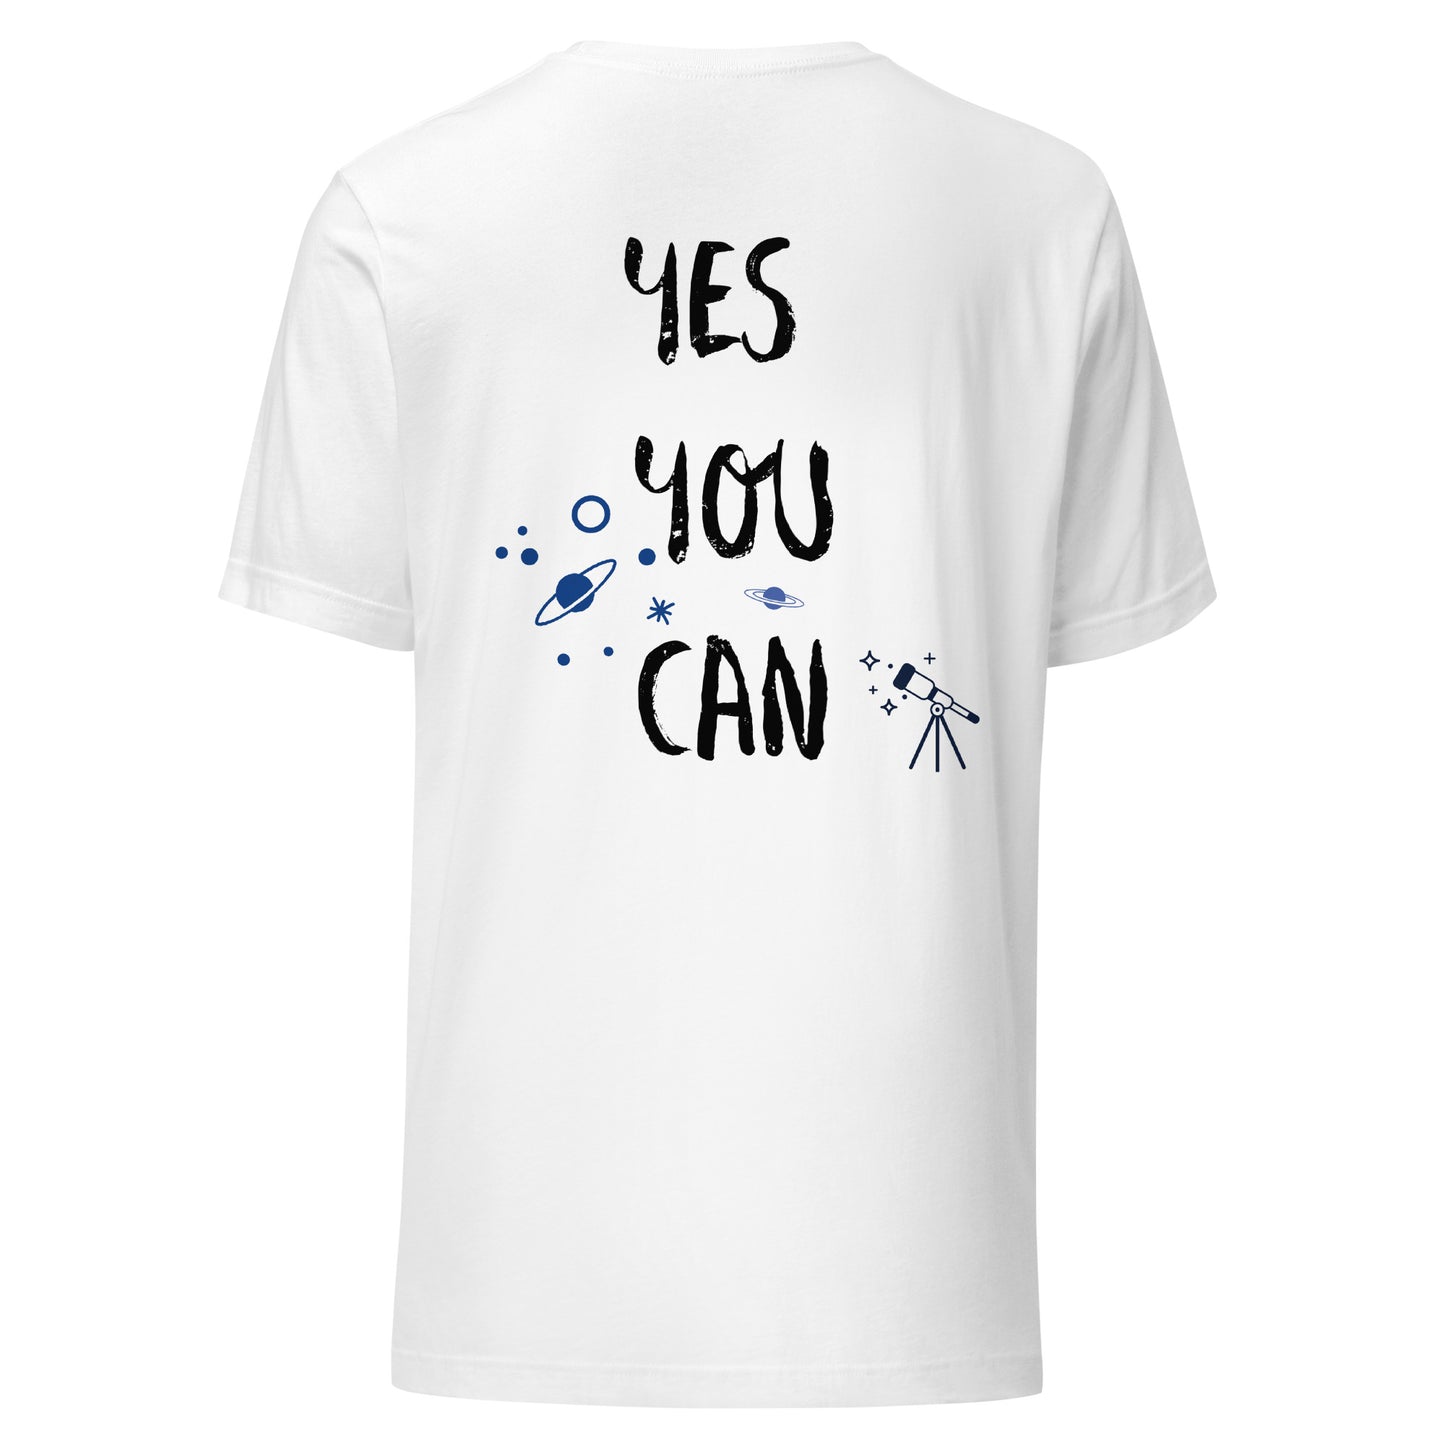 Yes You Can Unisex t-shirt